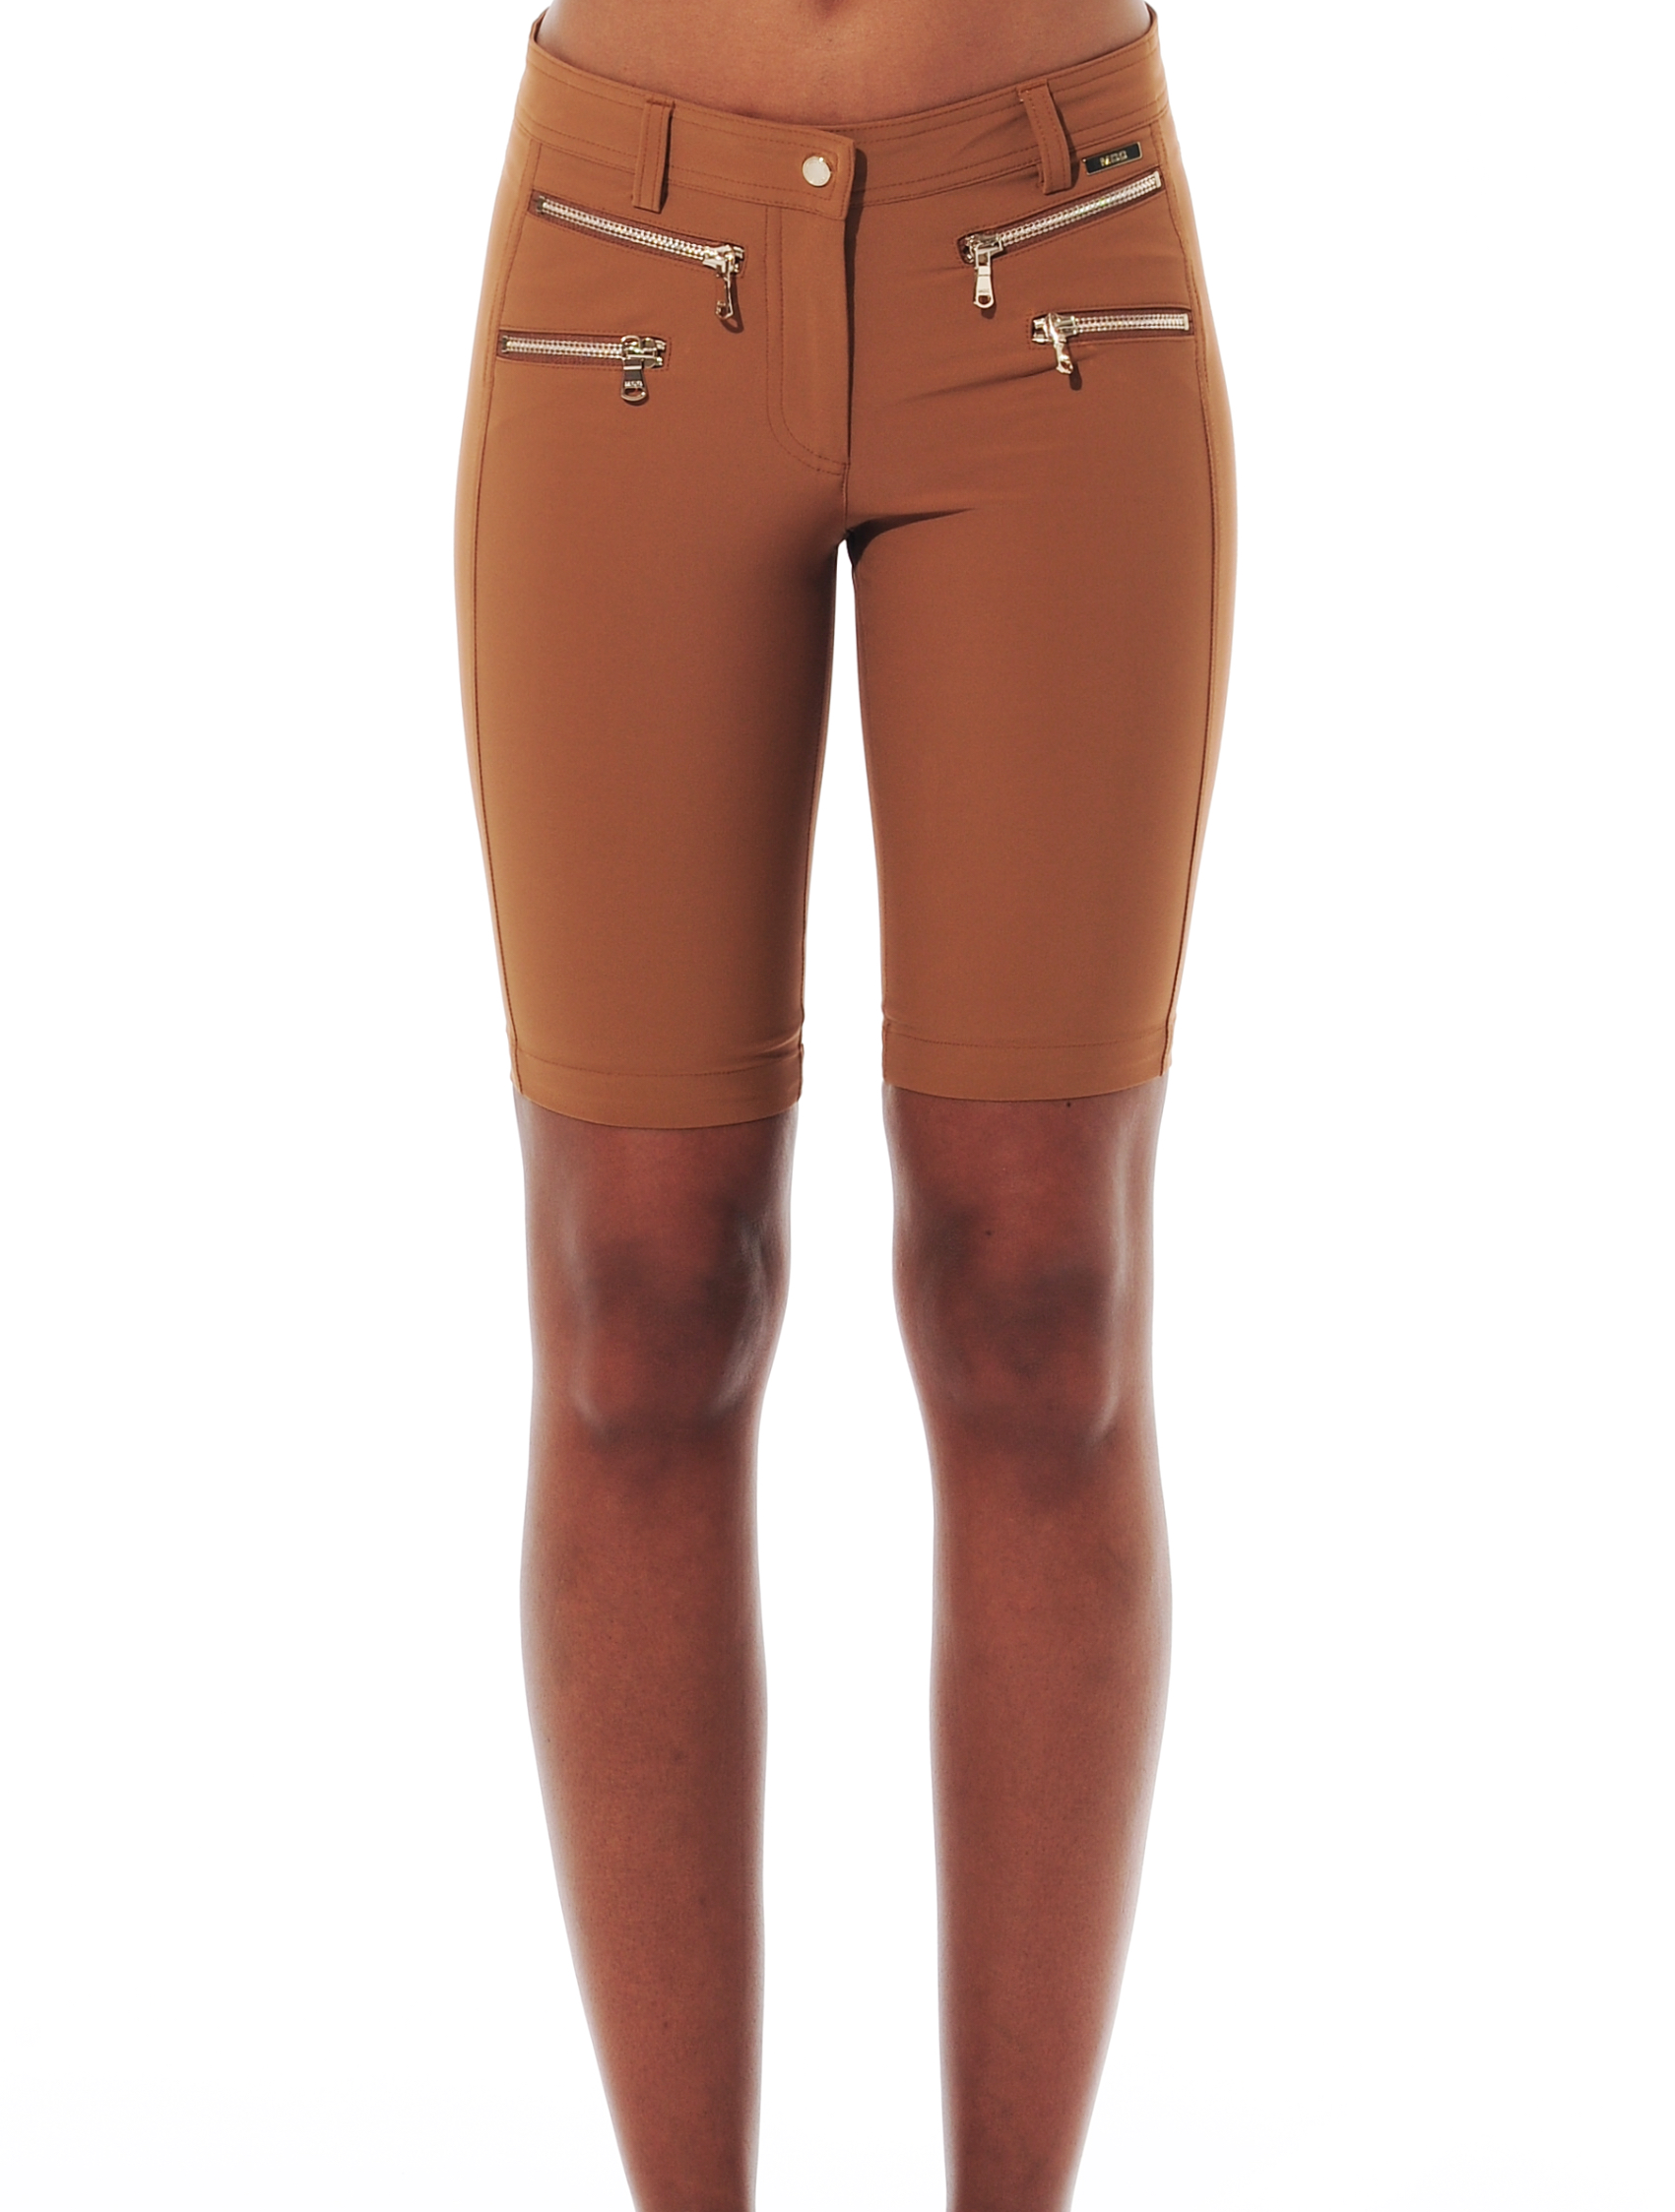 4way stretch double zip shorts ocre 